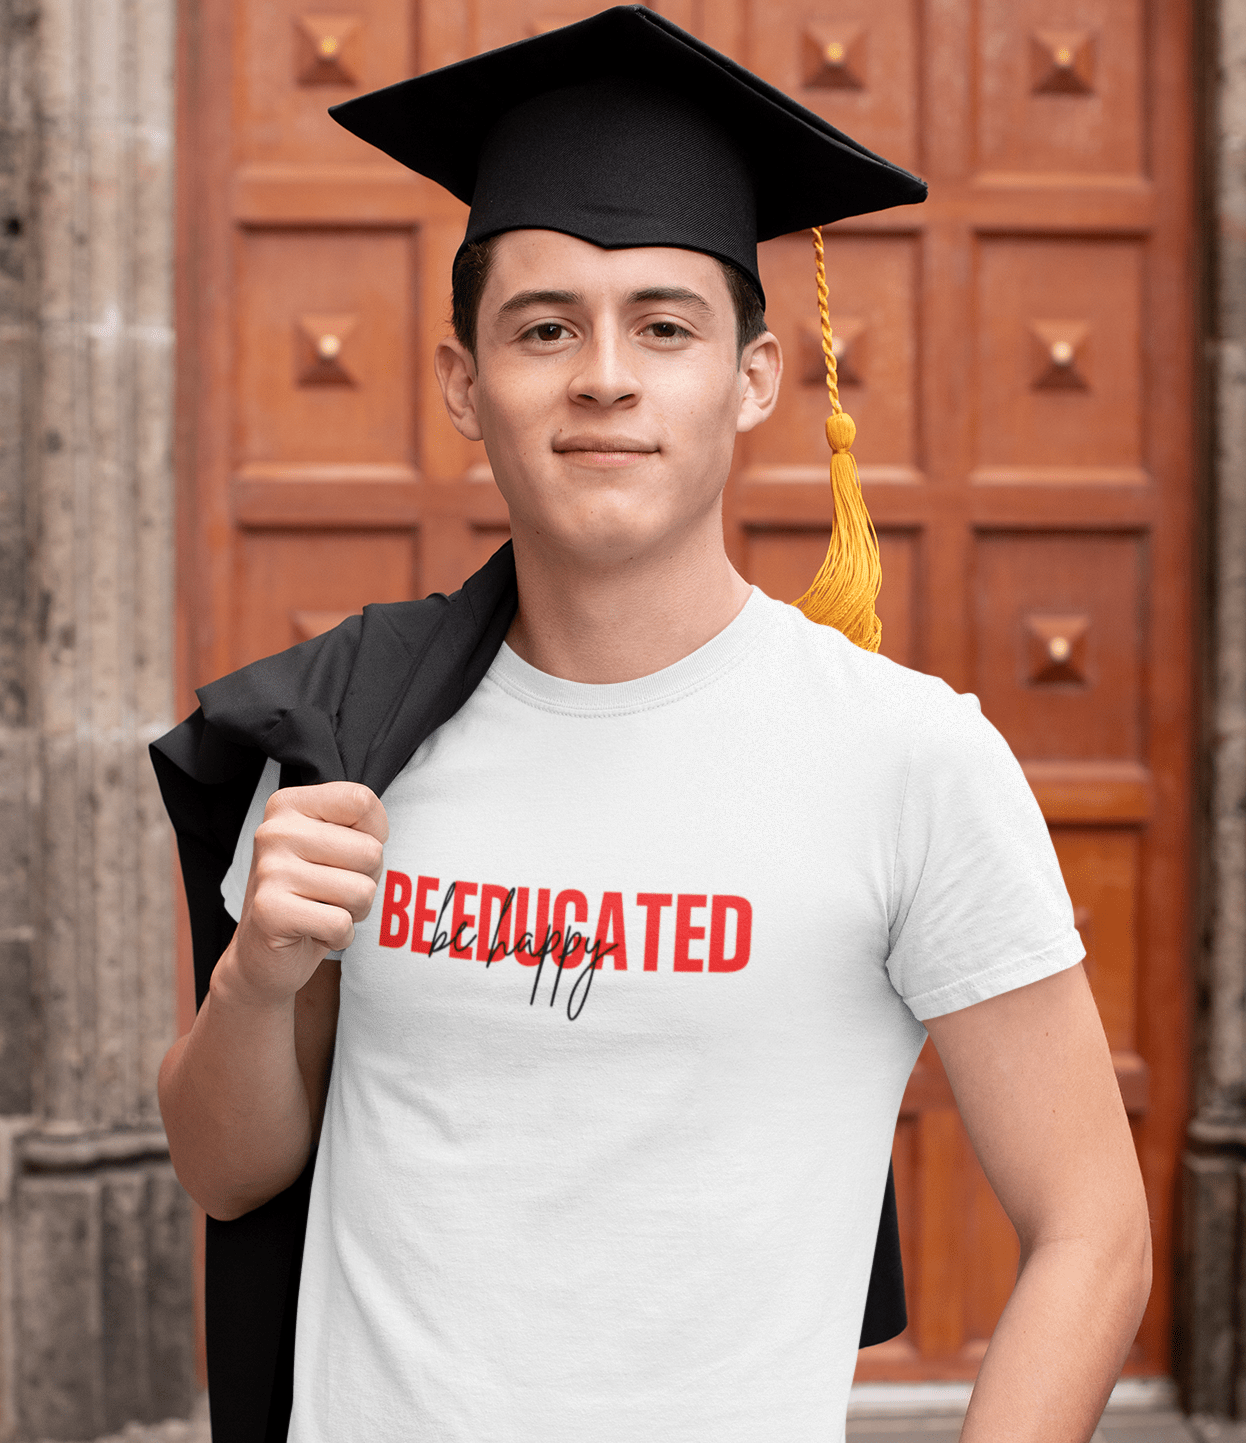 Be Educated T-shirt